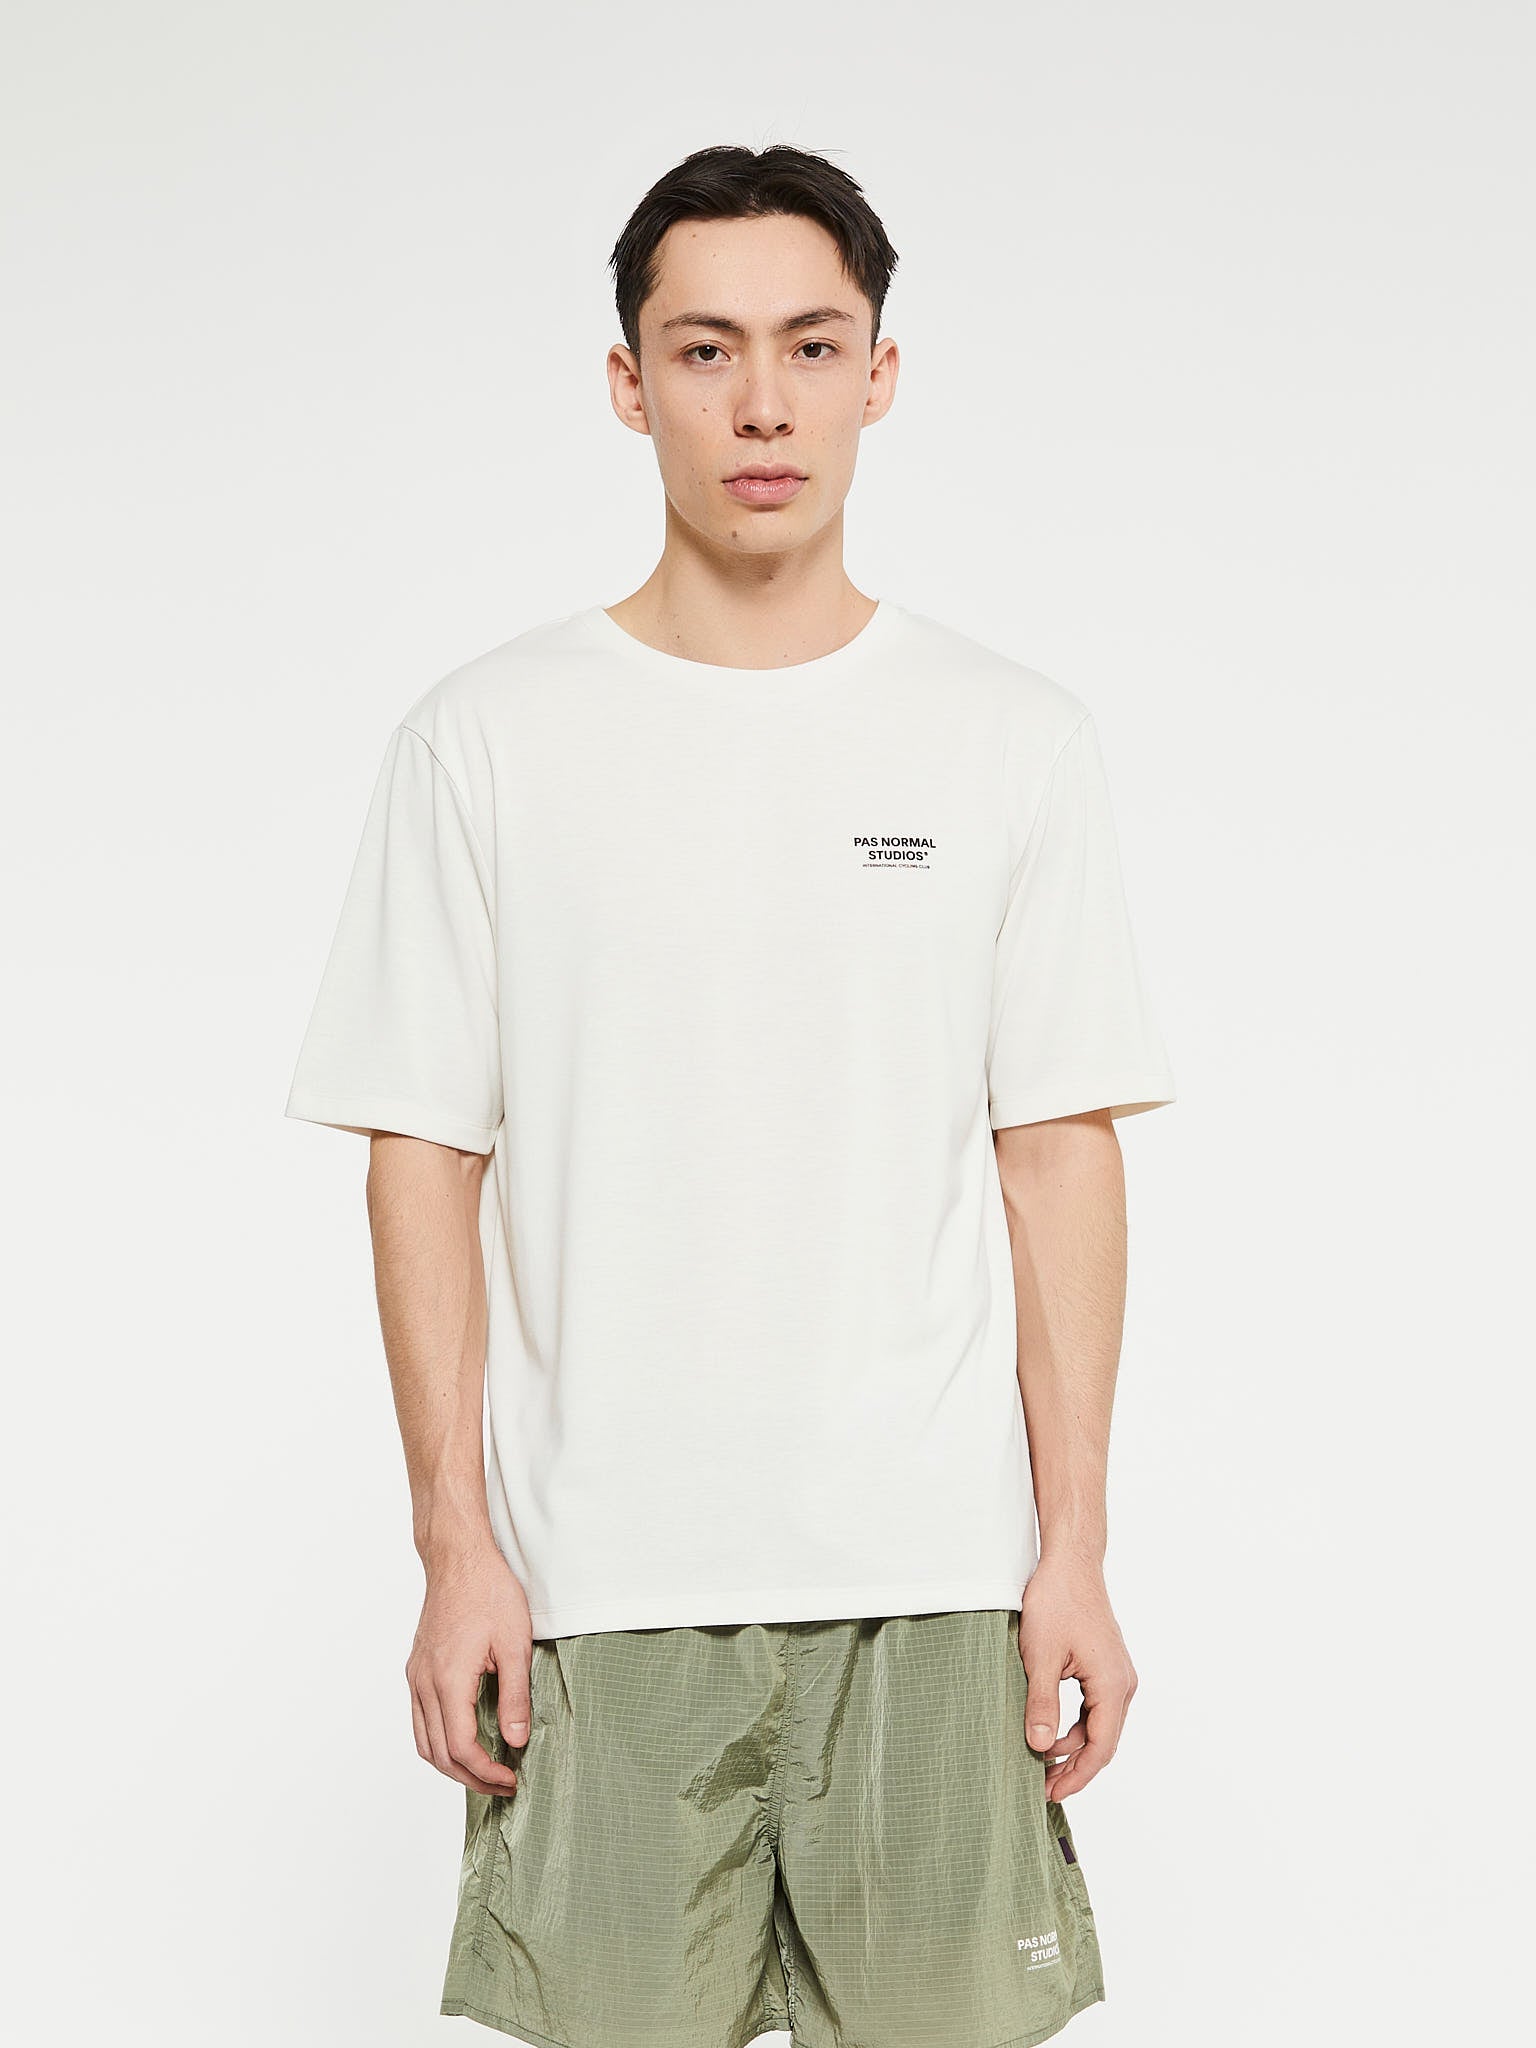 Pas Normal Studios - Off-Race Lightweight T-Shirt in White